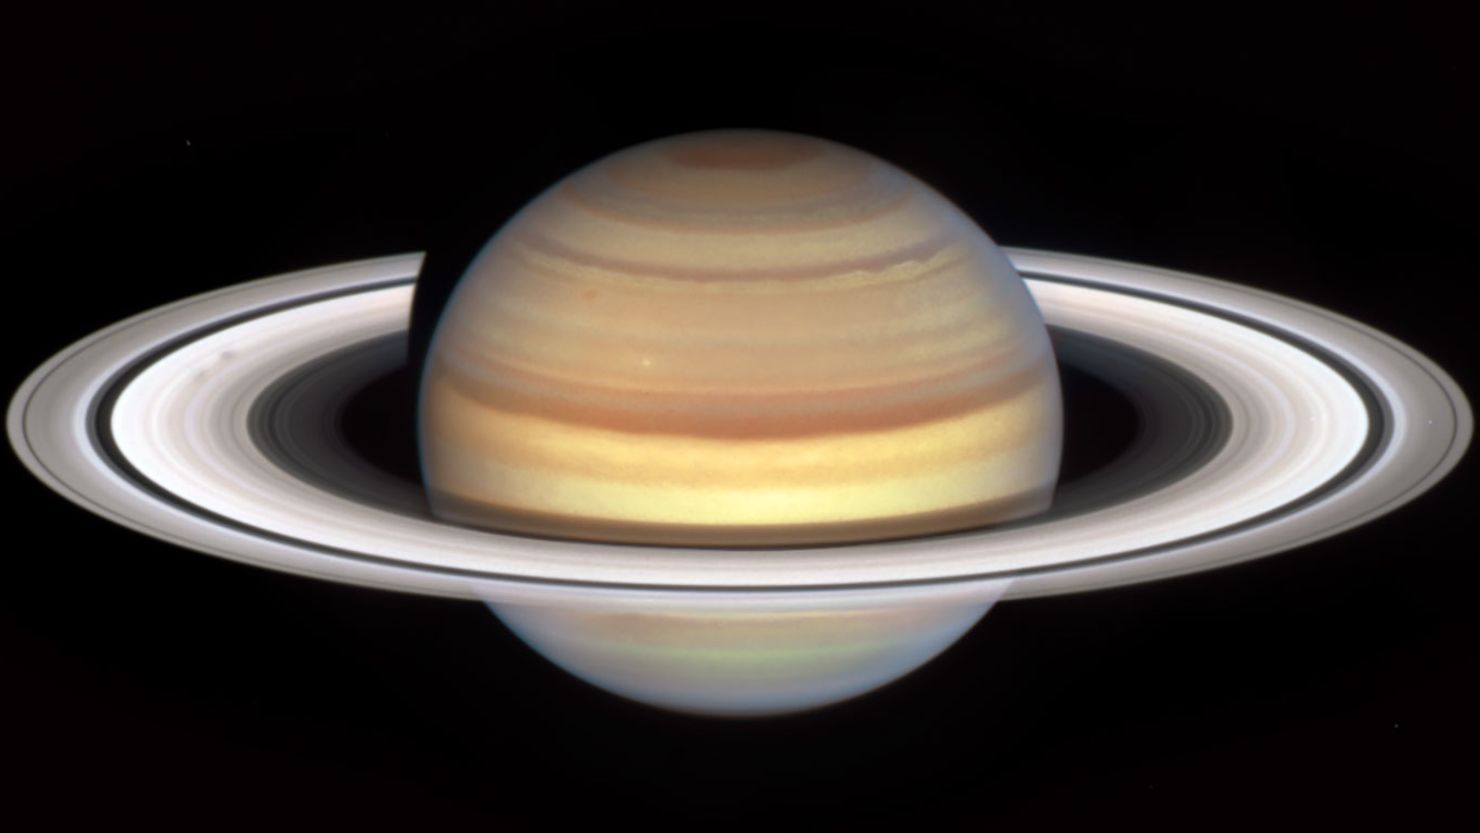 An image captured by NASA's Hubble Space Telescope's marks the start of Saturn's "spoke season," with the appearance of two smudgy spokes (at left) in the B ring.
